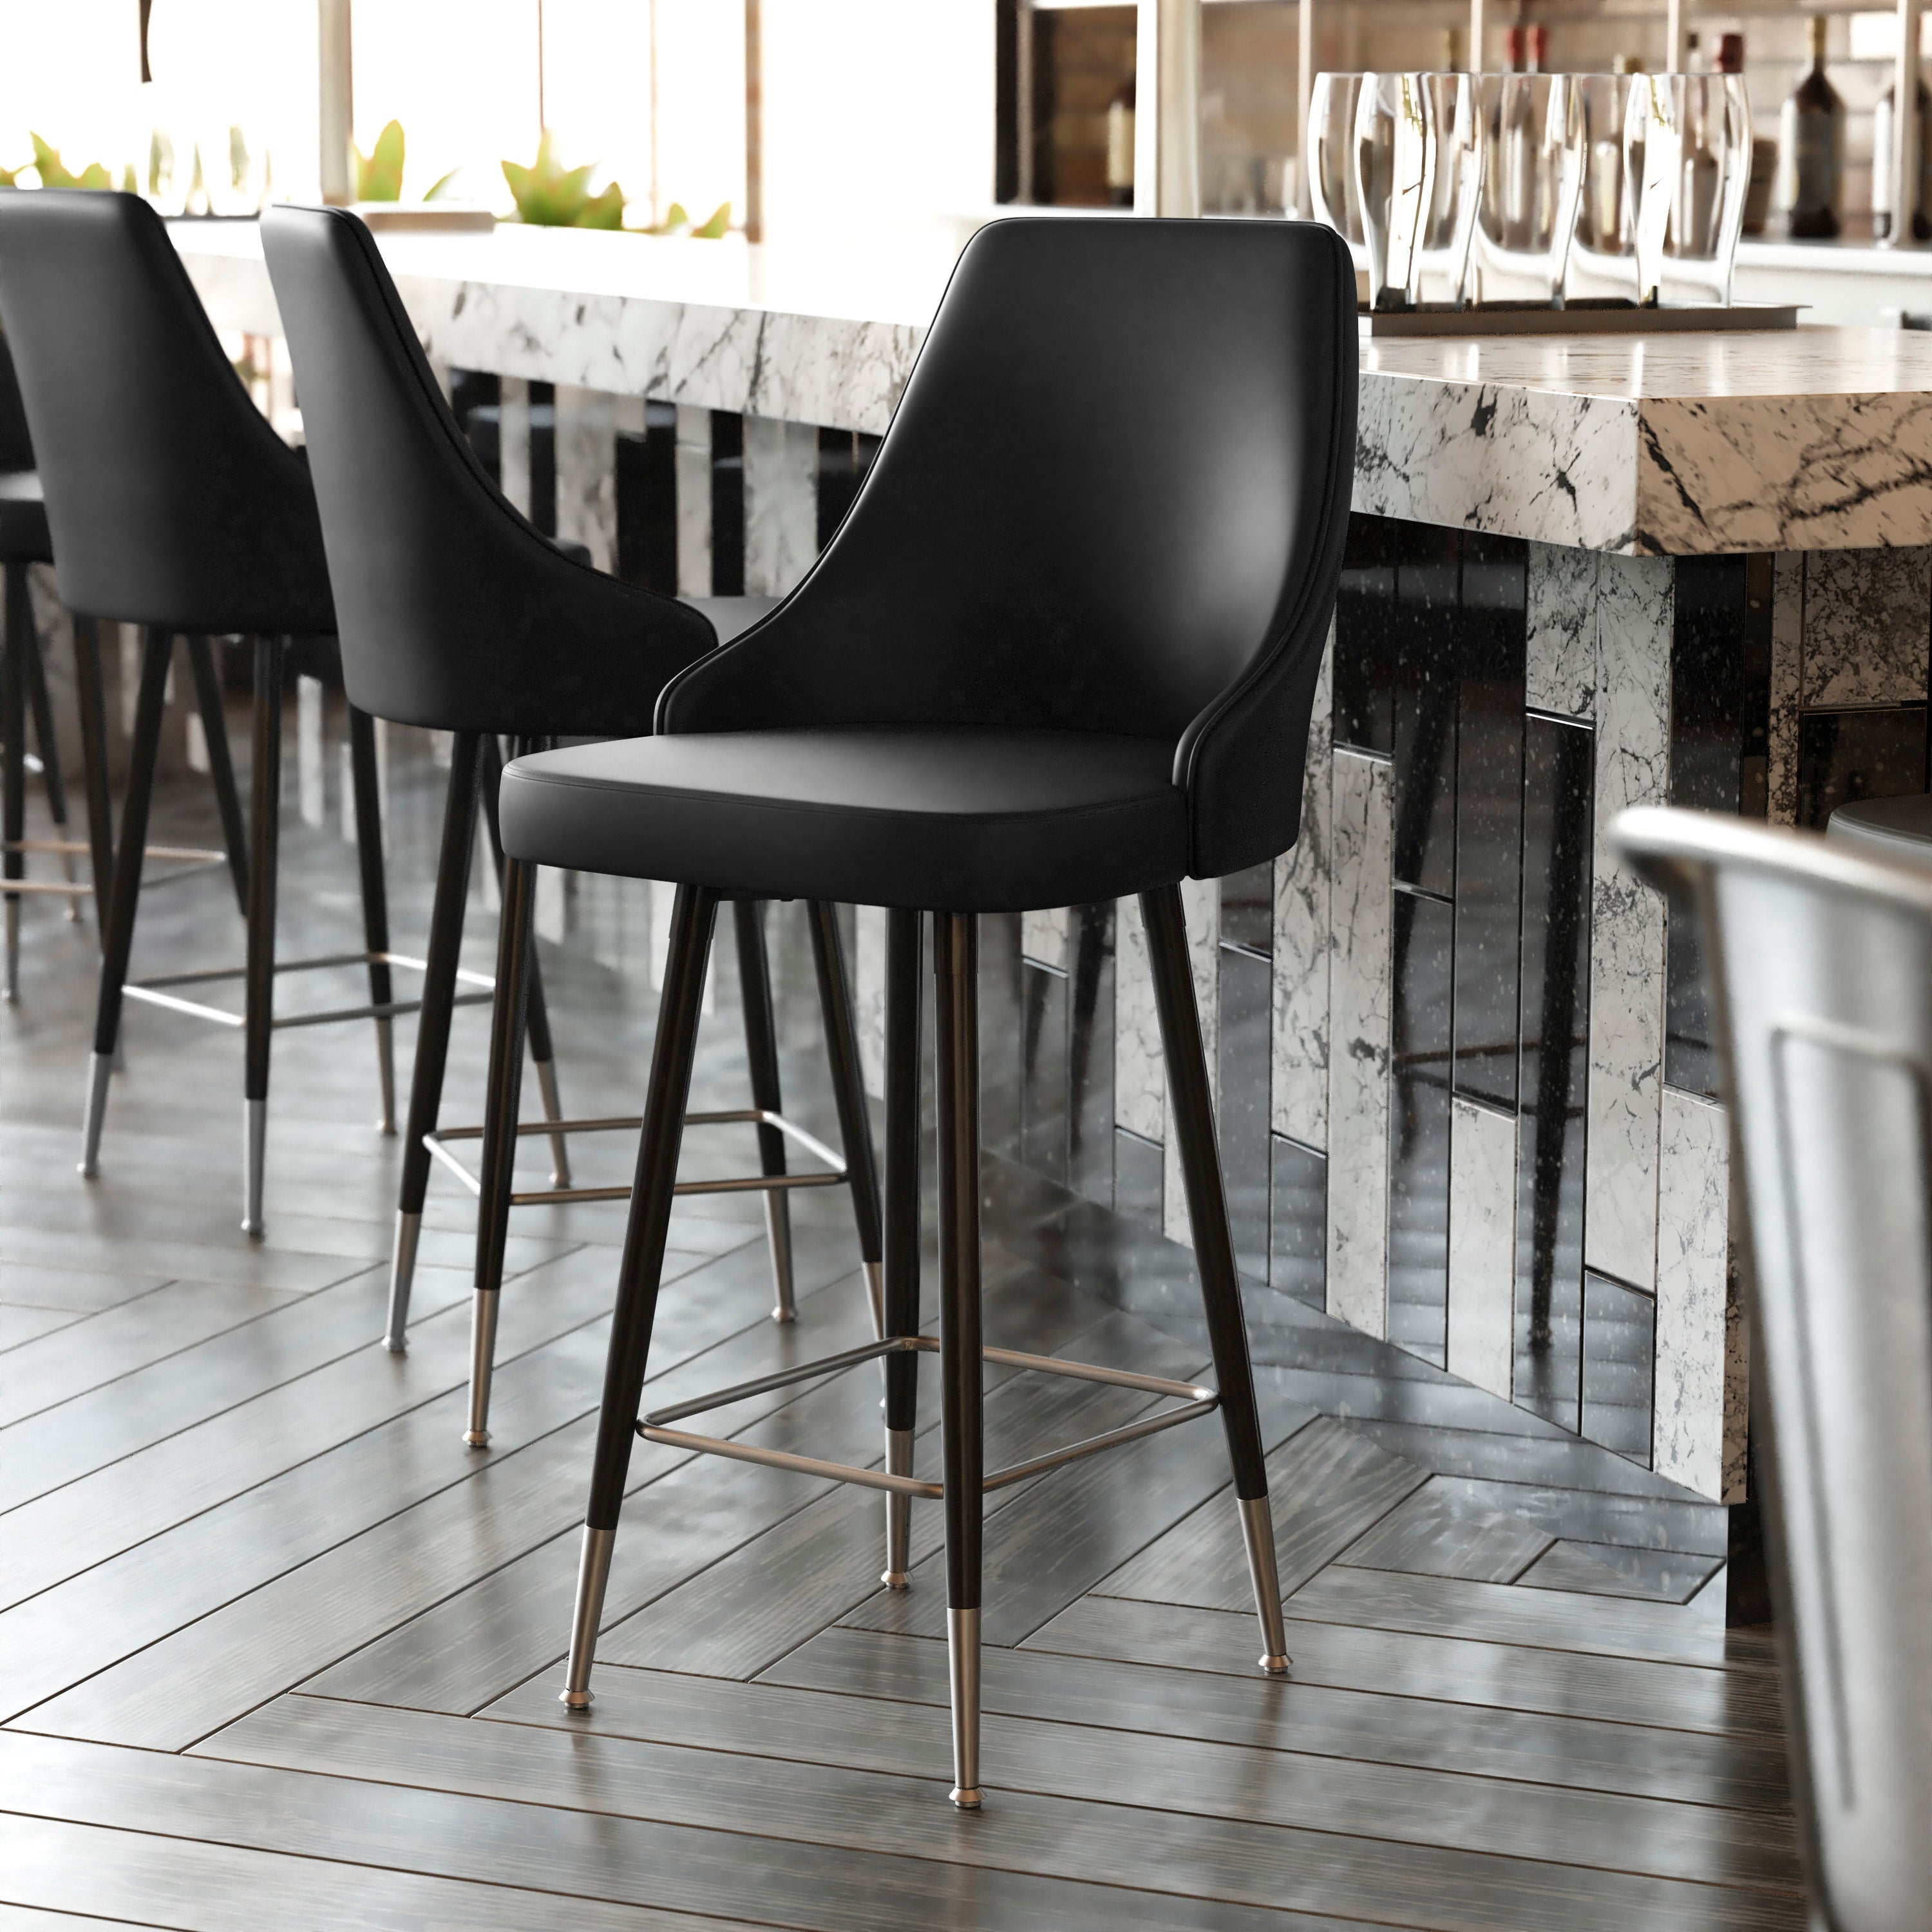 Shelly Set of 2 Commercial LeatherSoft Counter Height Bar Stools with Solid Black Metal Frames and Chrome Accented Feet and Footrests-Counter Stool-Flash Furniture-Wall2Wall Furnishings